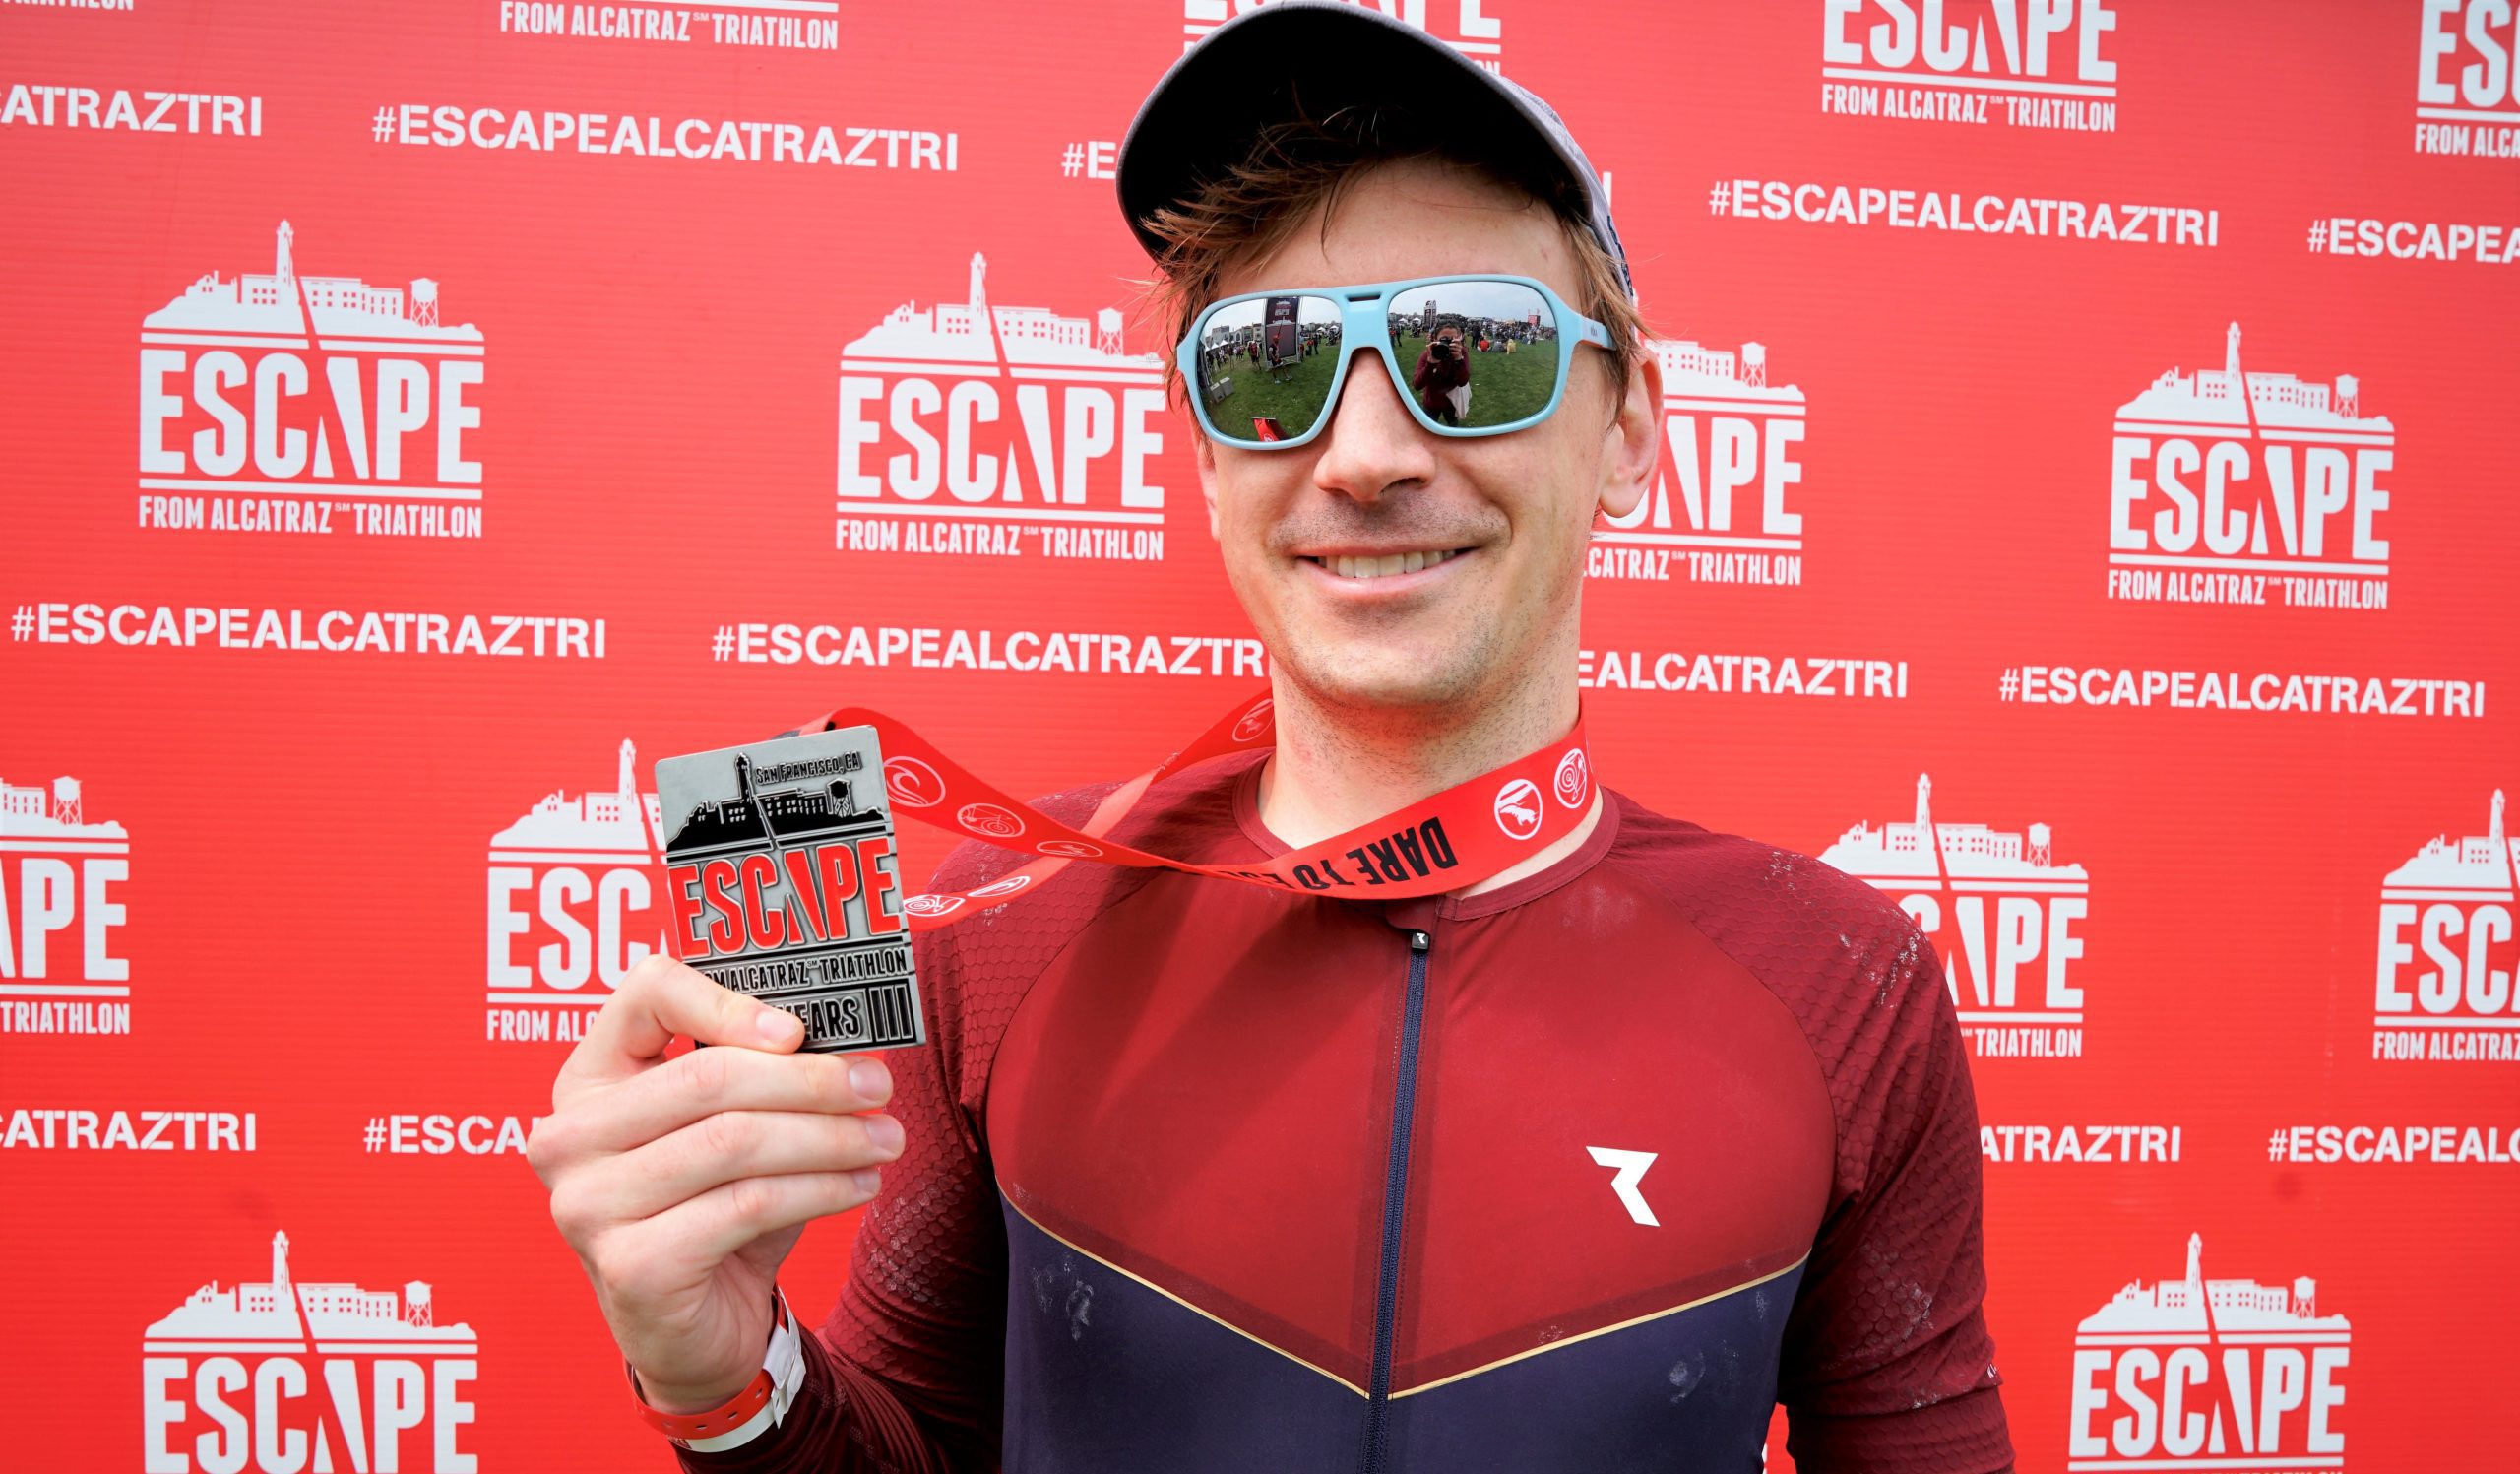 Scott Grubb proudly holds his Escape from Alcatraz Triathlon medal in the finishers circle